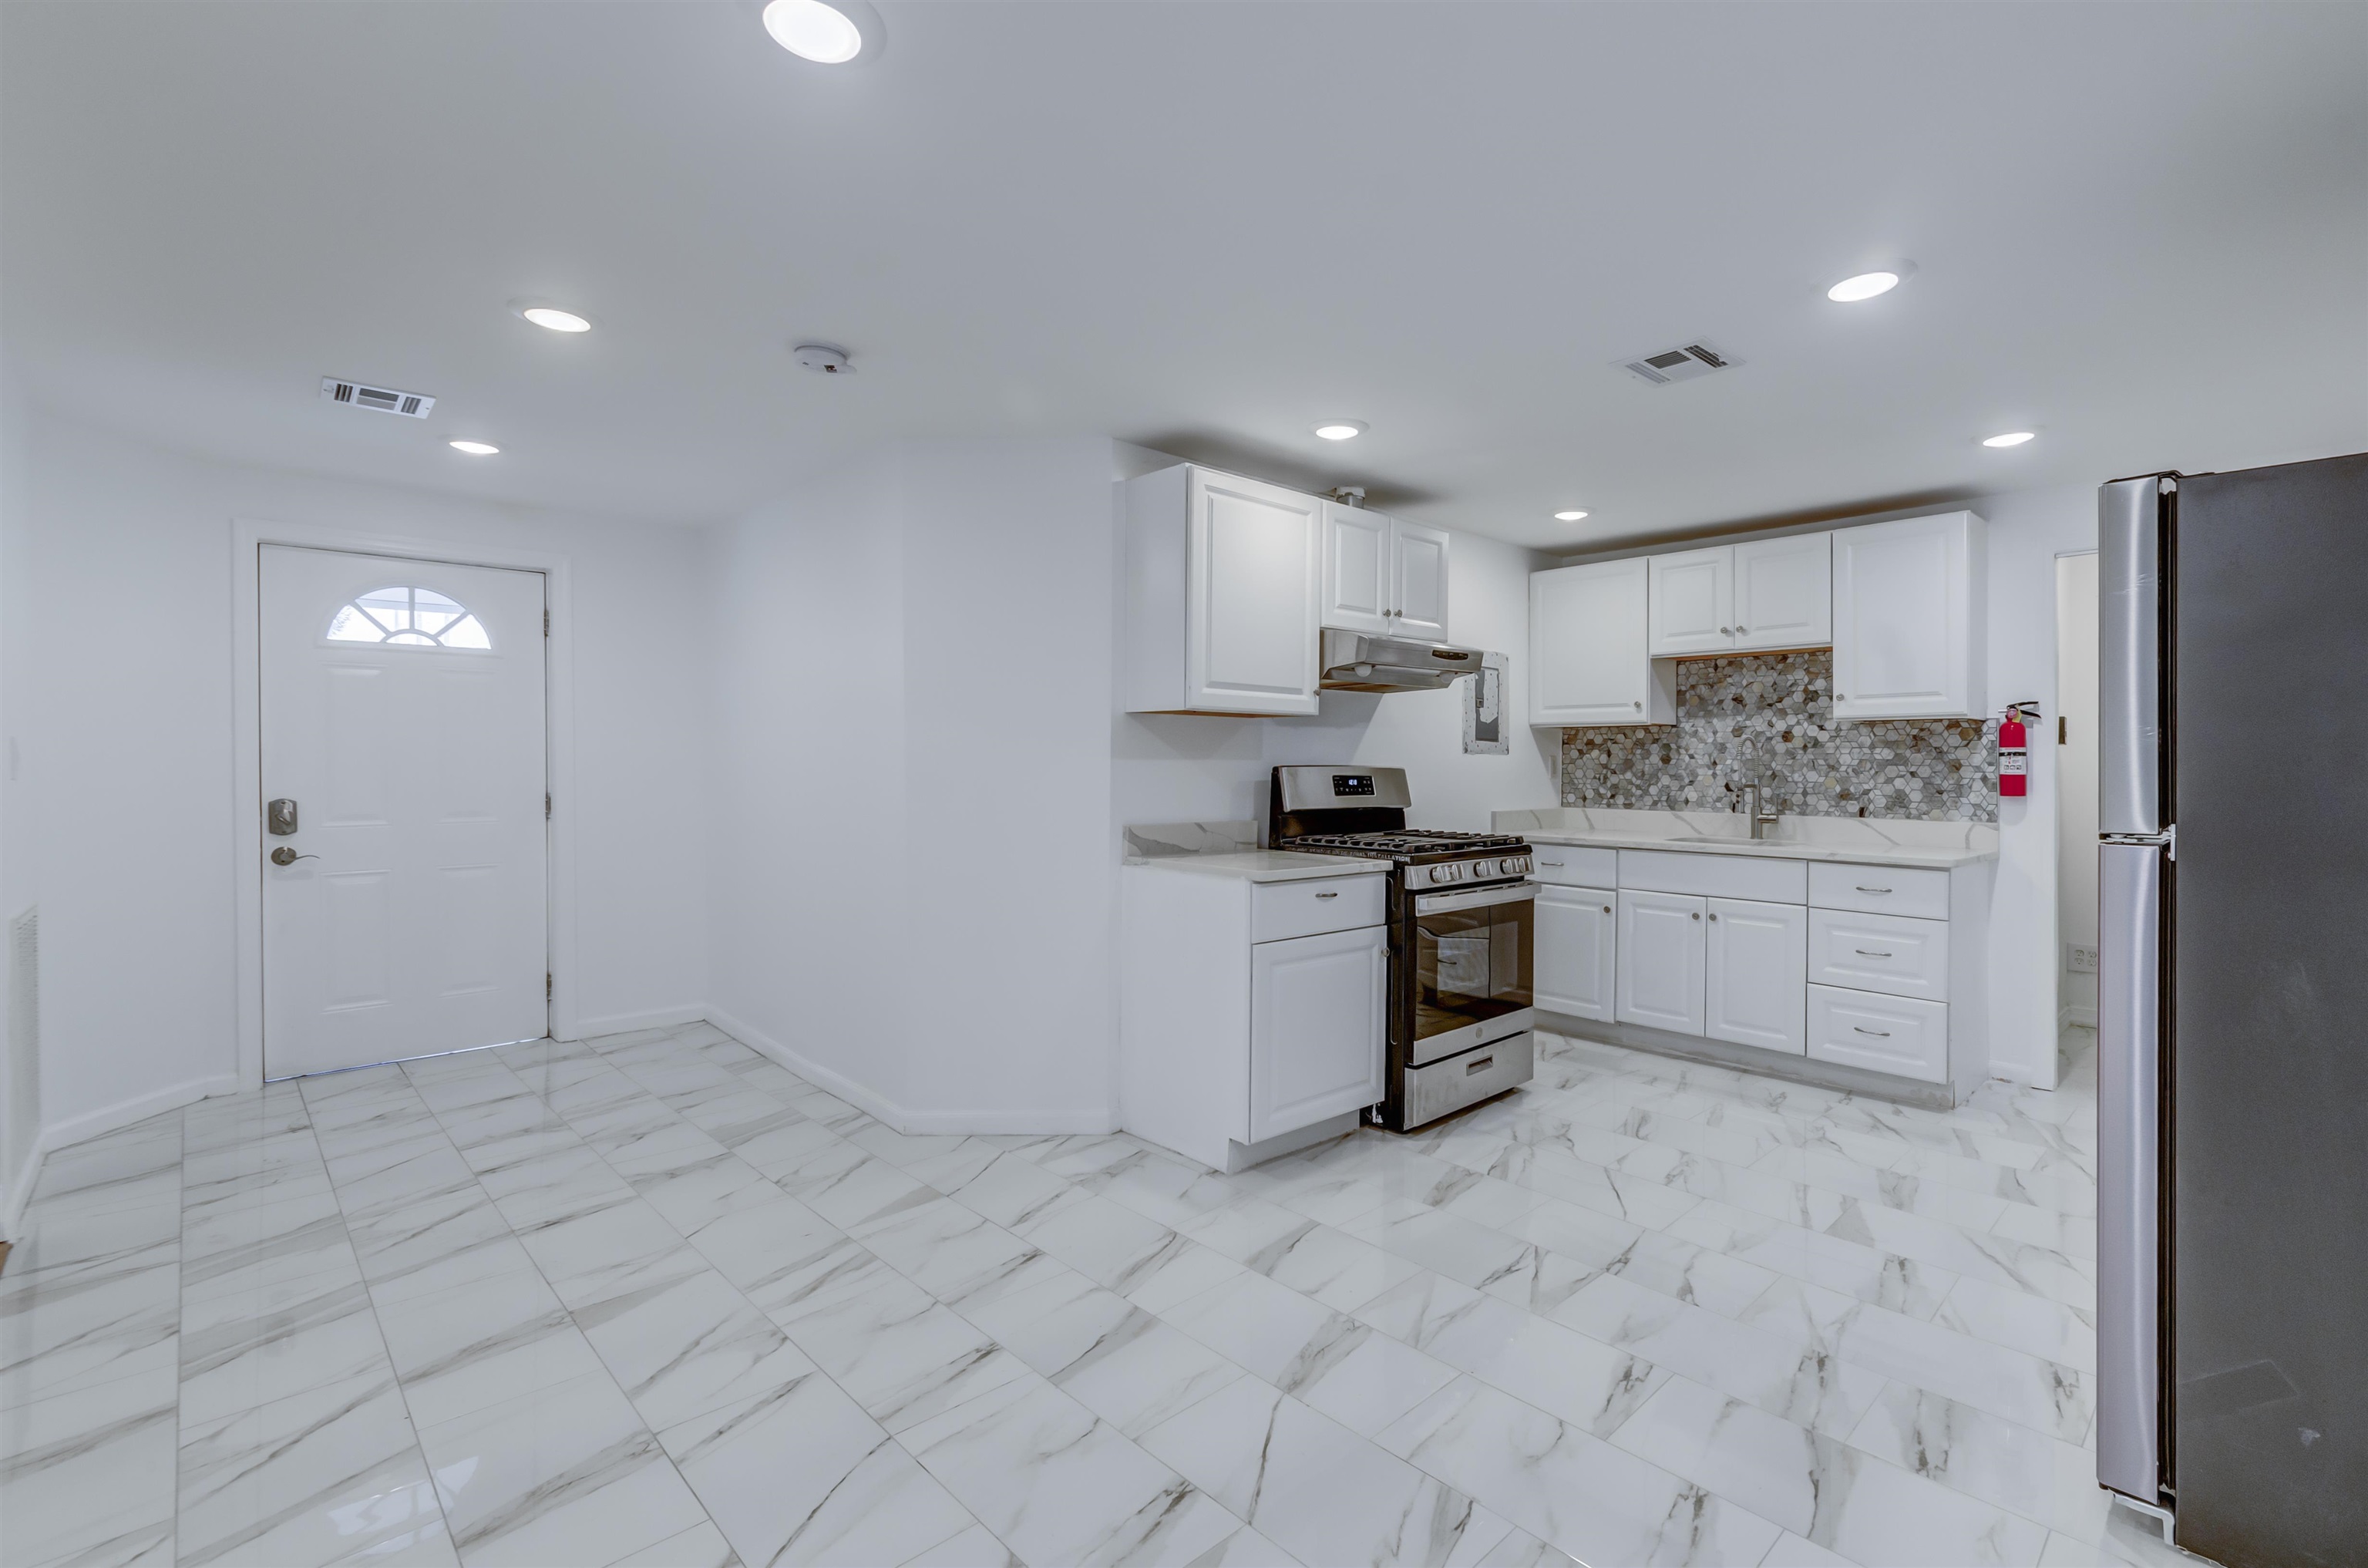 # 240001866 - For Rent in JERSEY CITY - Journal Square NJ